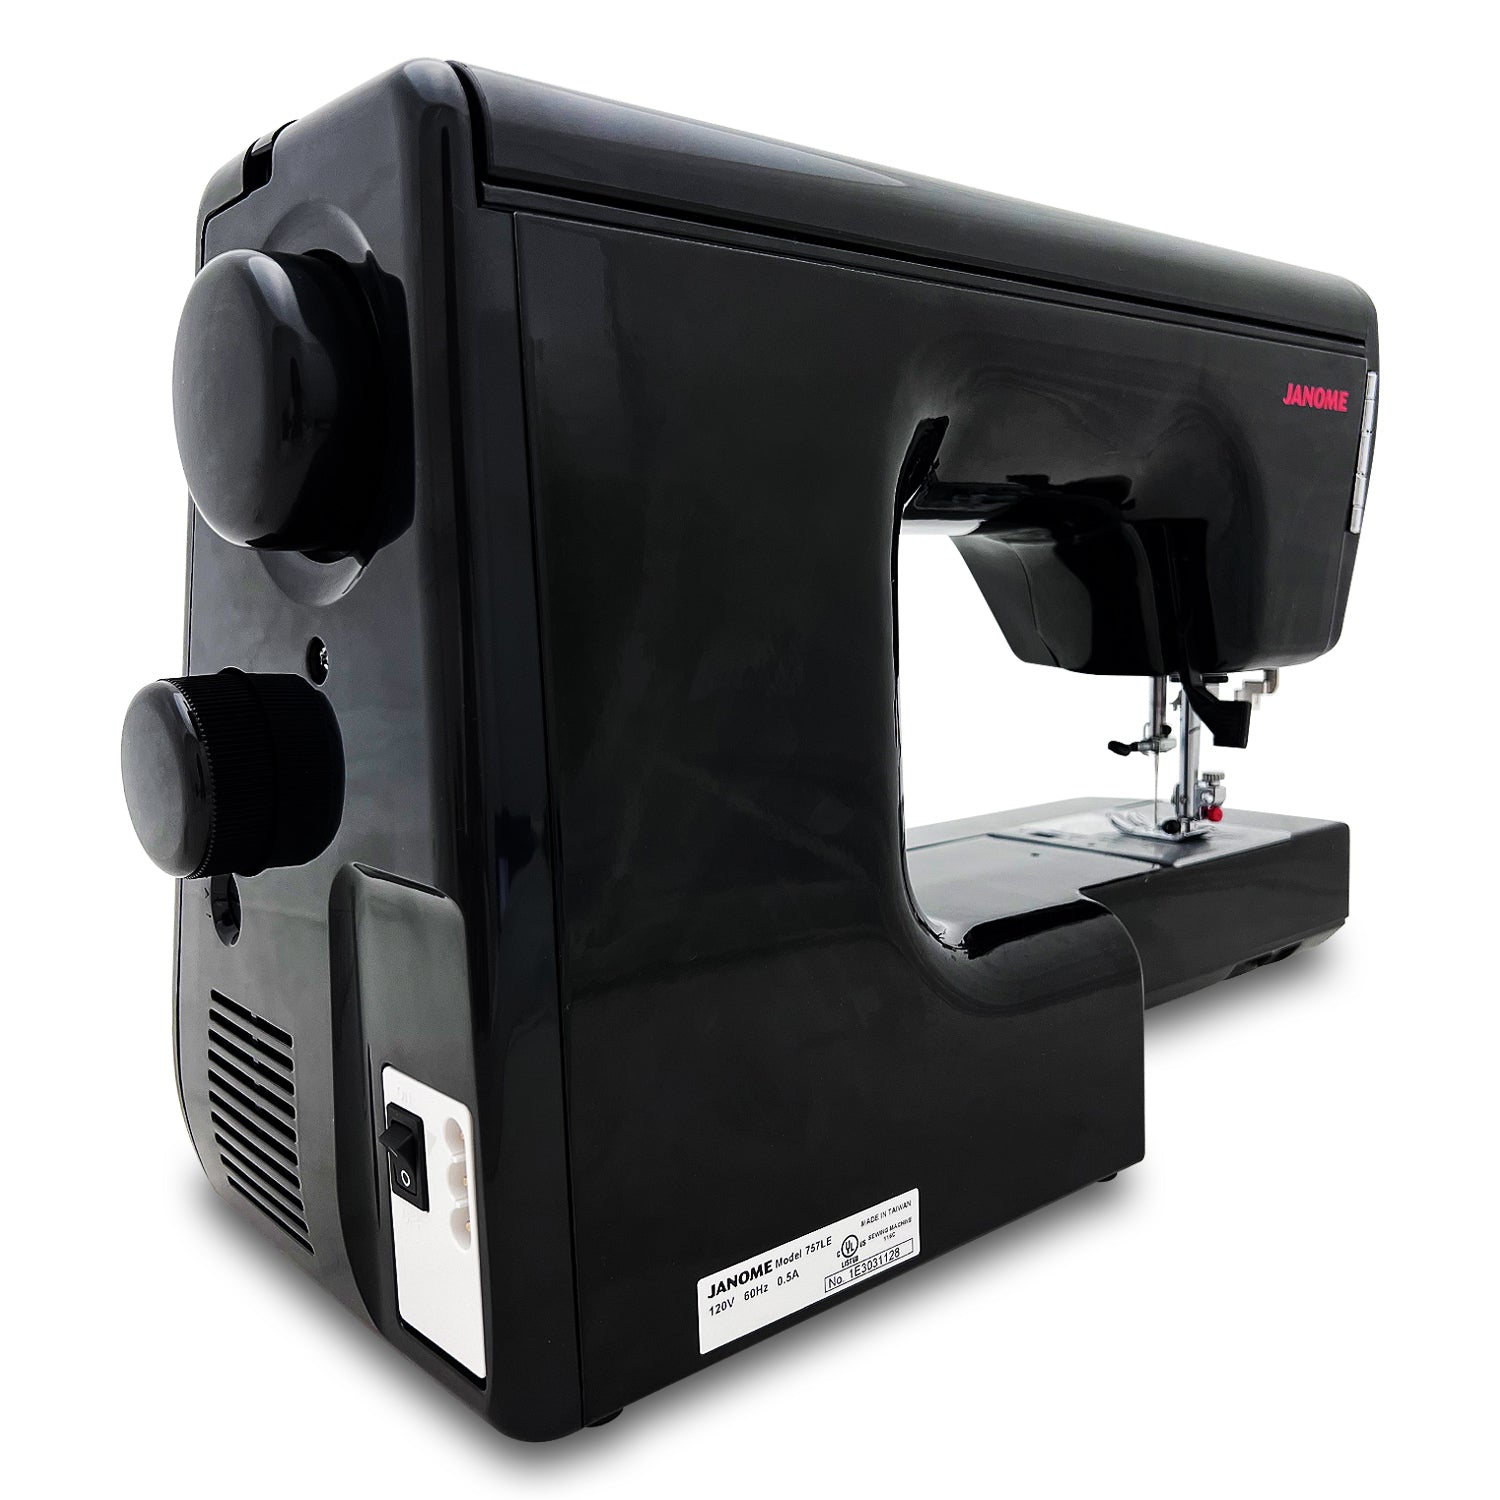 image of the Janome HD5000BE Sewing and Quilting Machine back